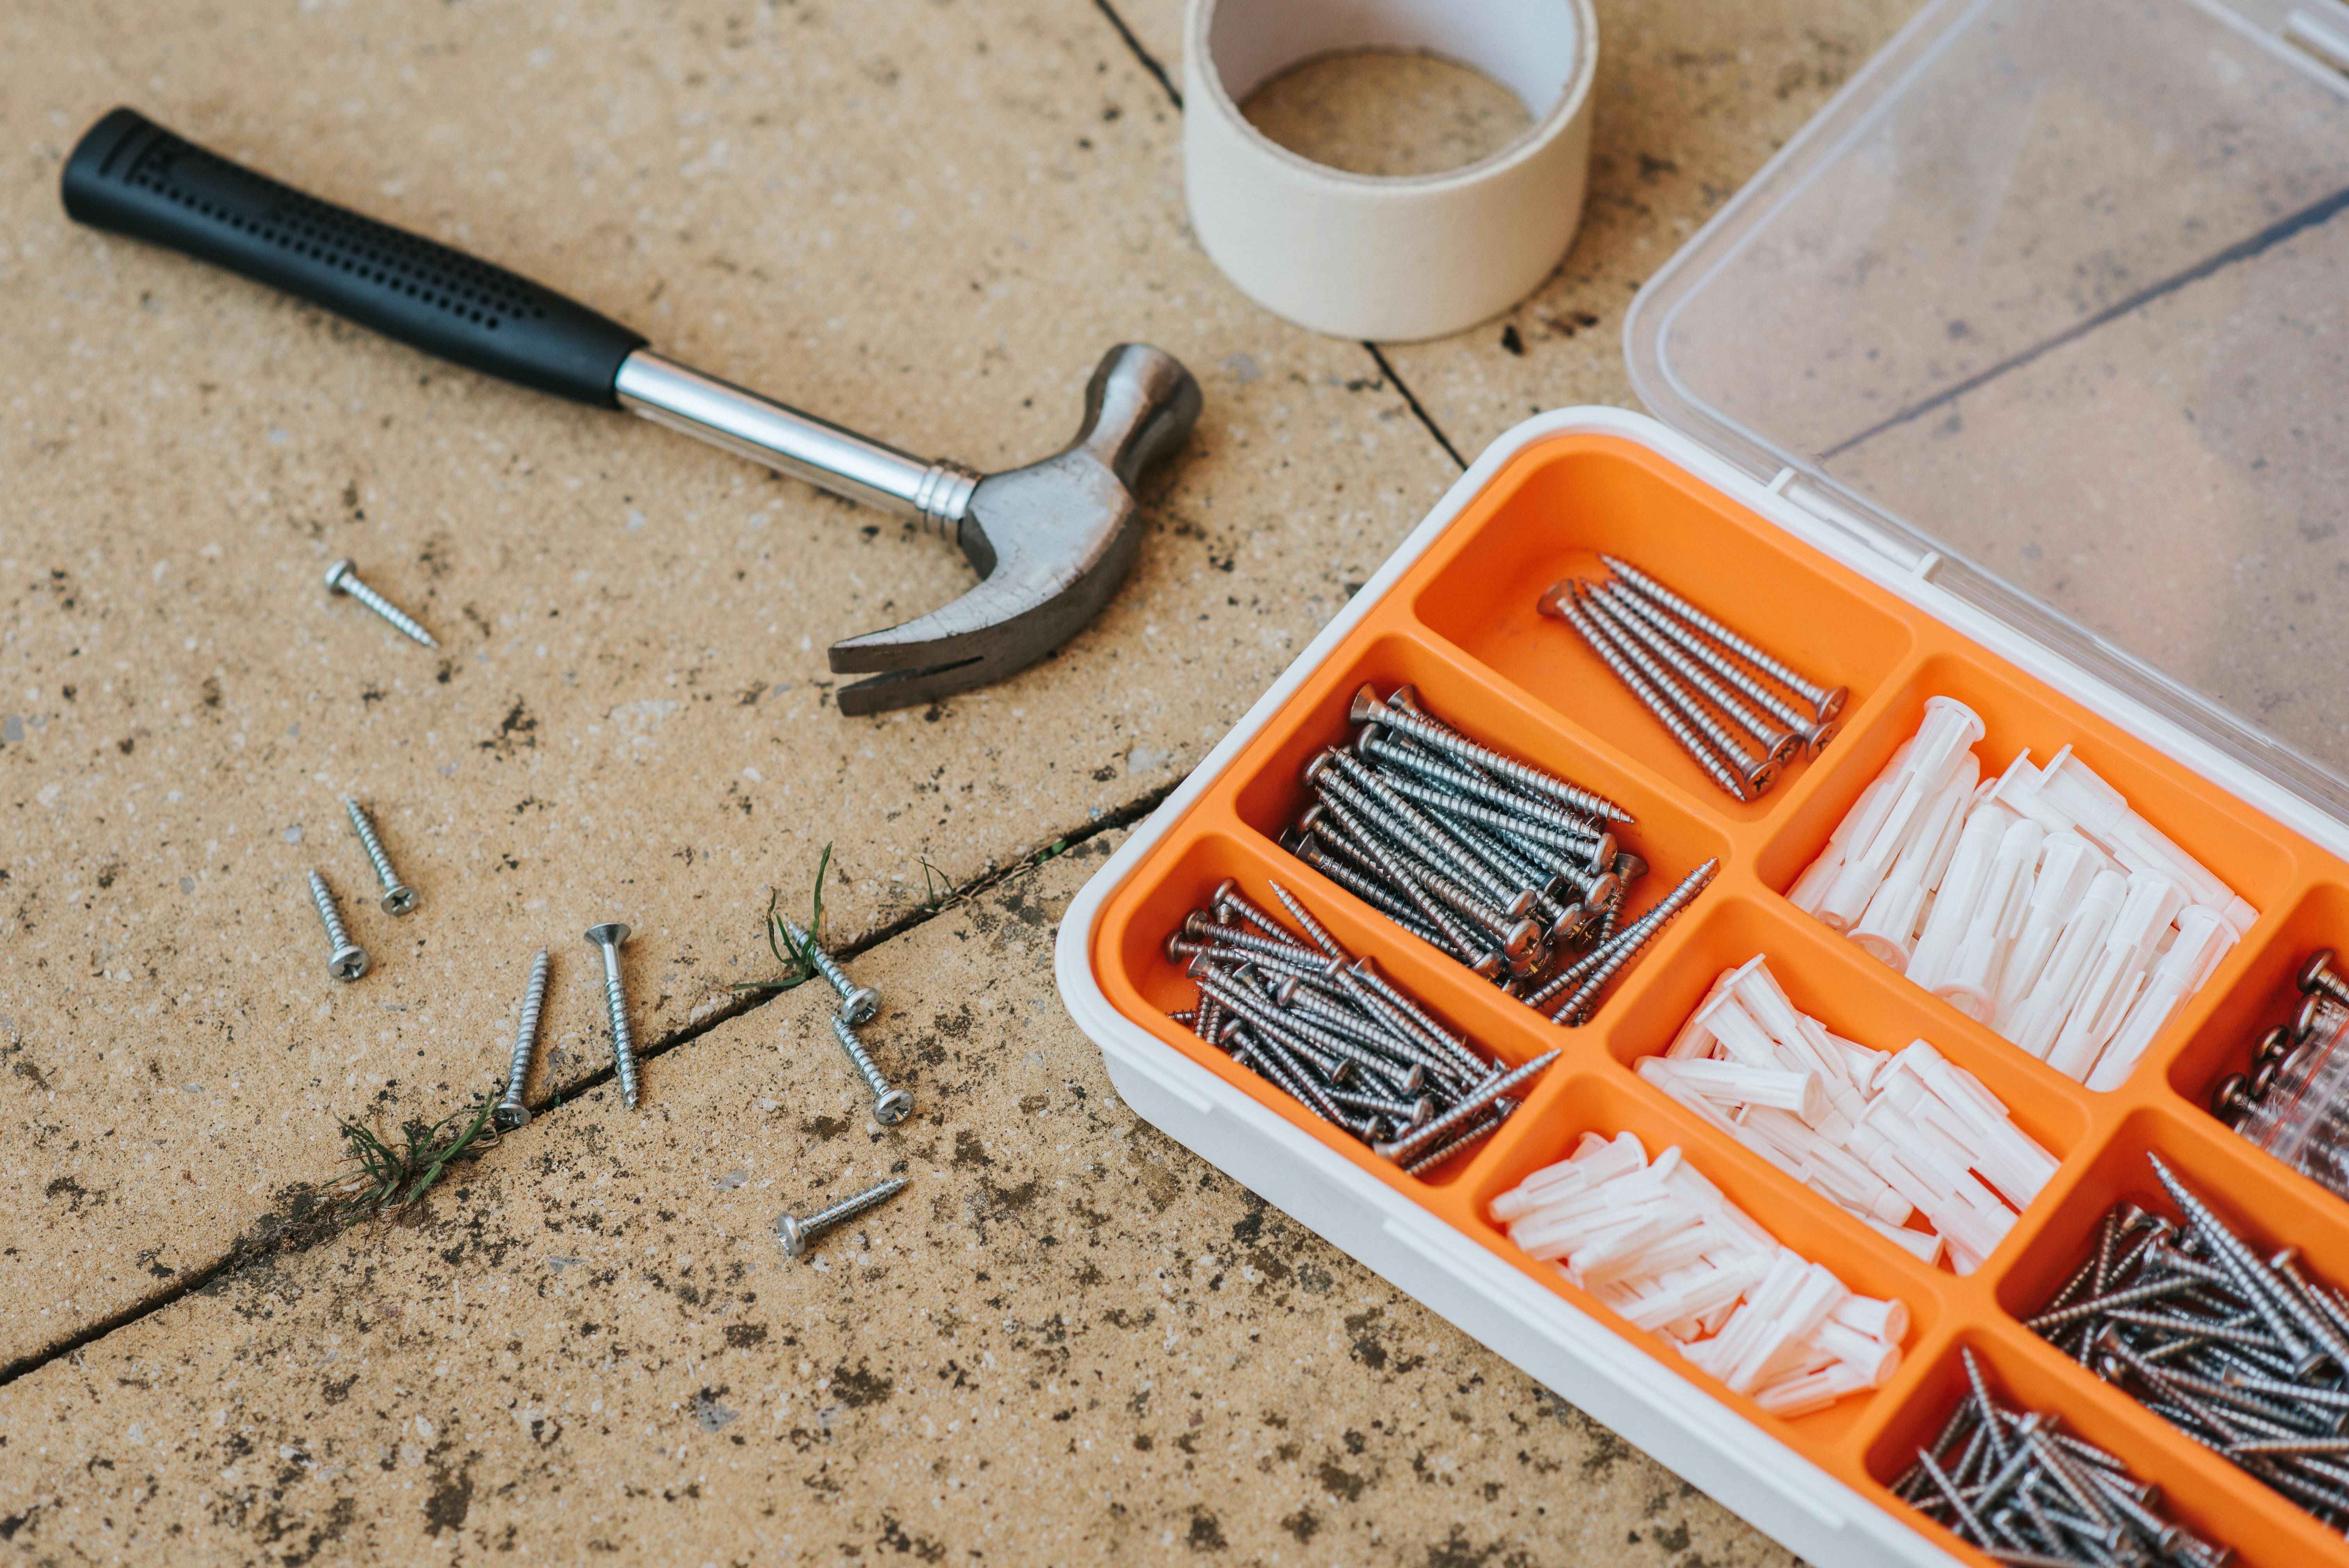 Toolkit Photos, Download The BEST Free Toolkit Stock Photos & HD Images